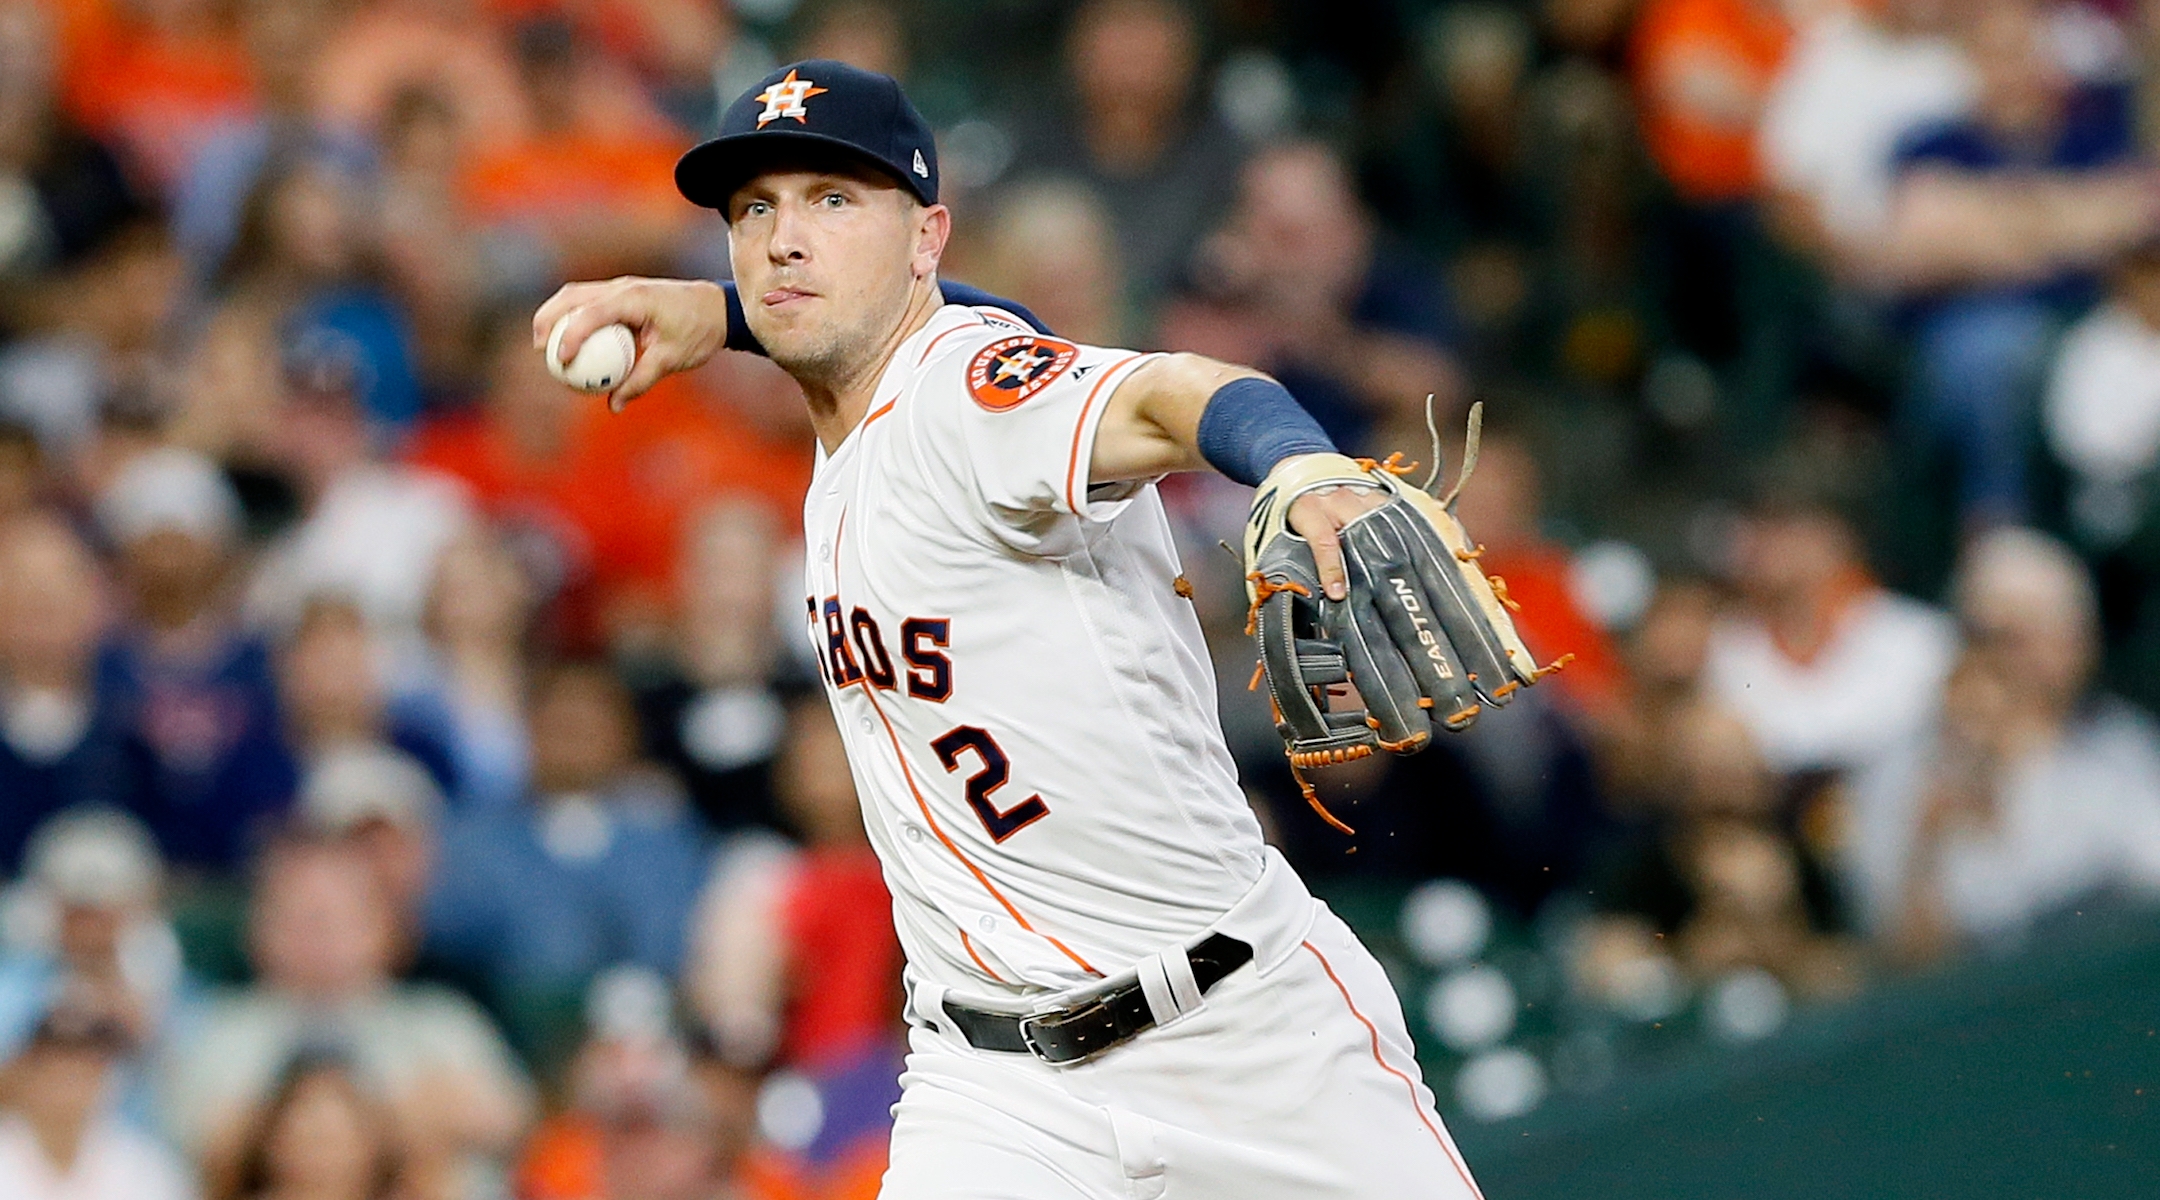 Alex Bregman aims to repeat as AllStar Game MVP after being elected a